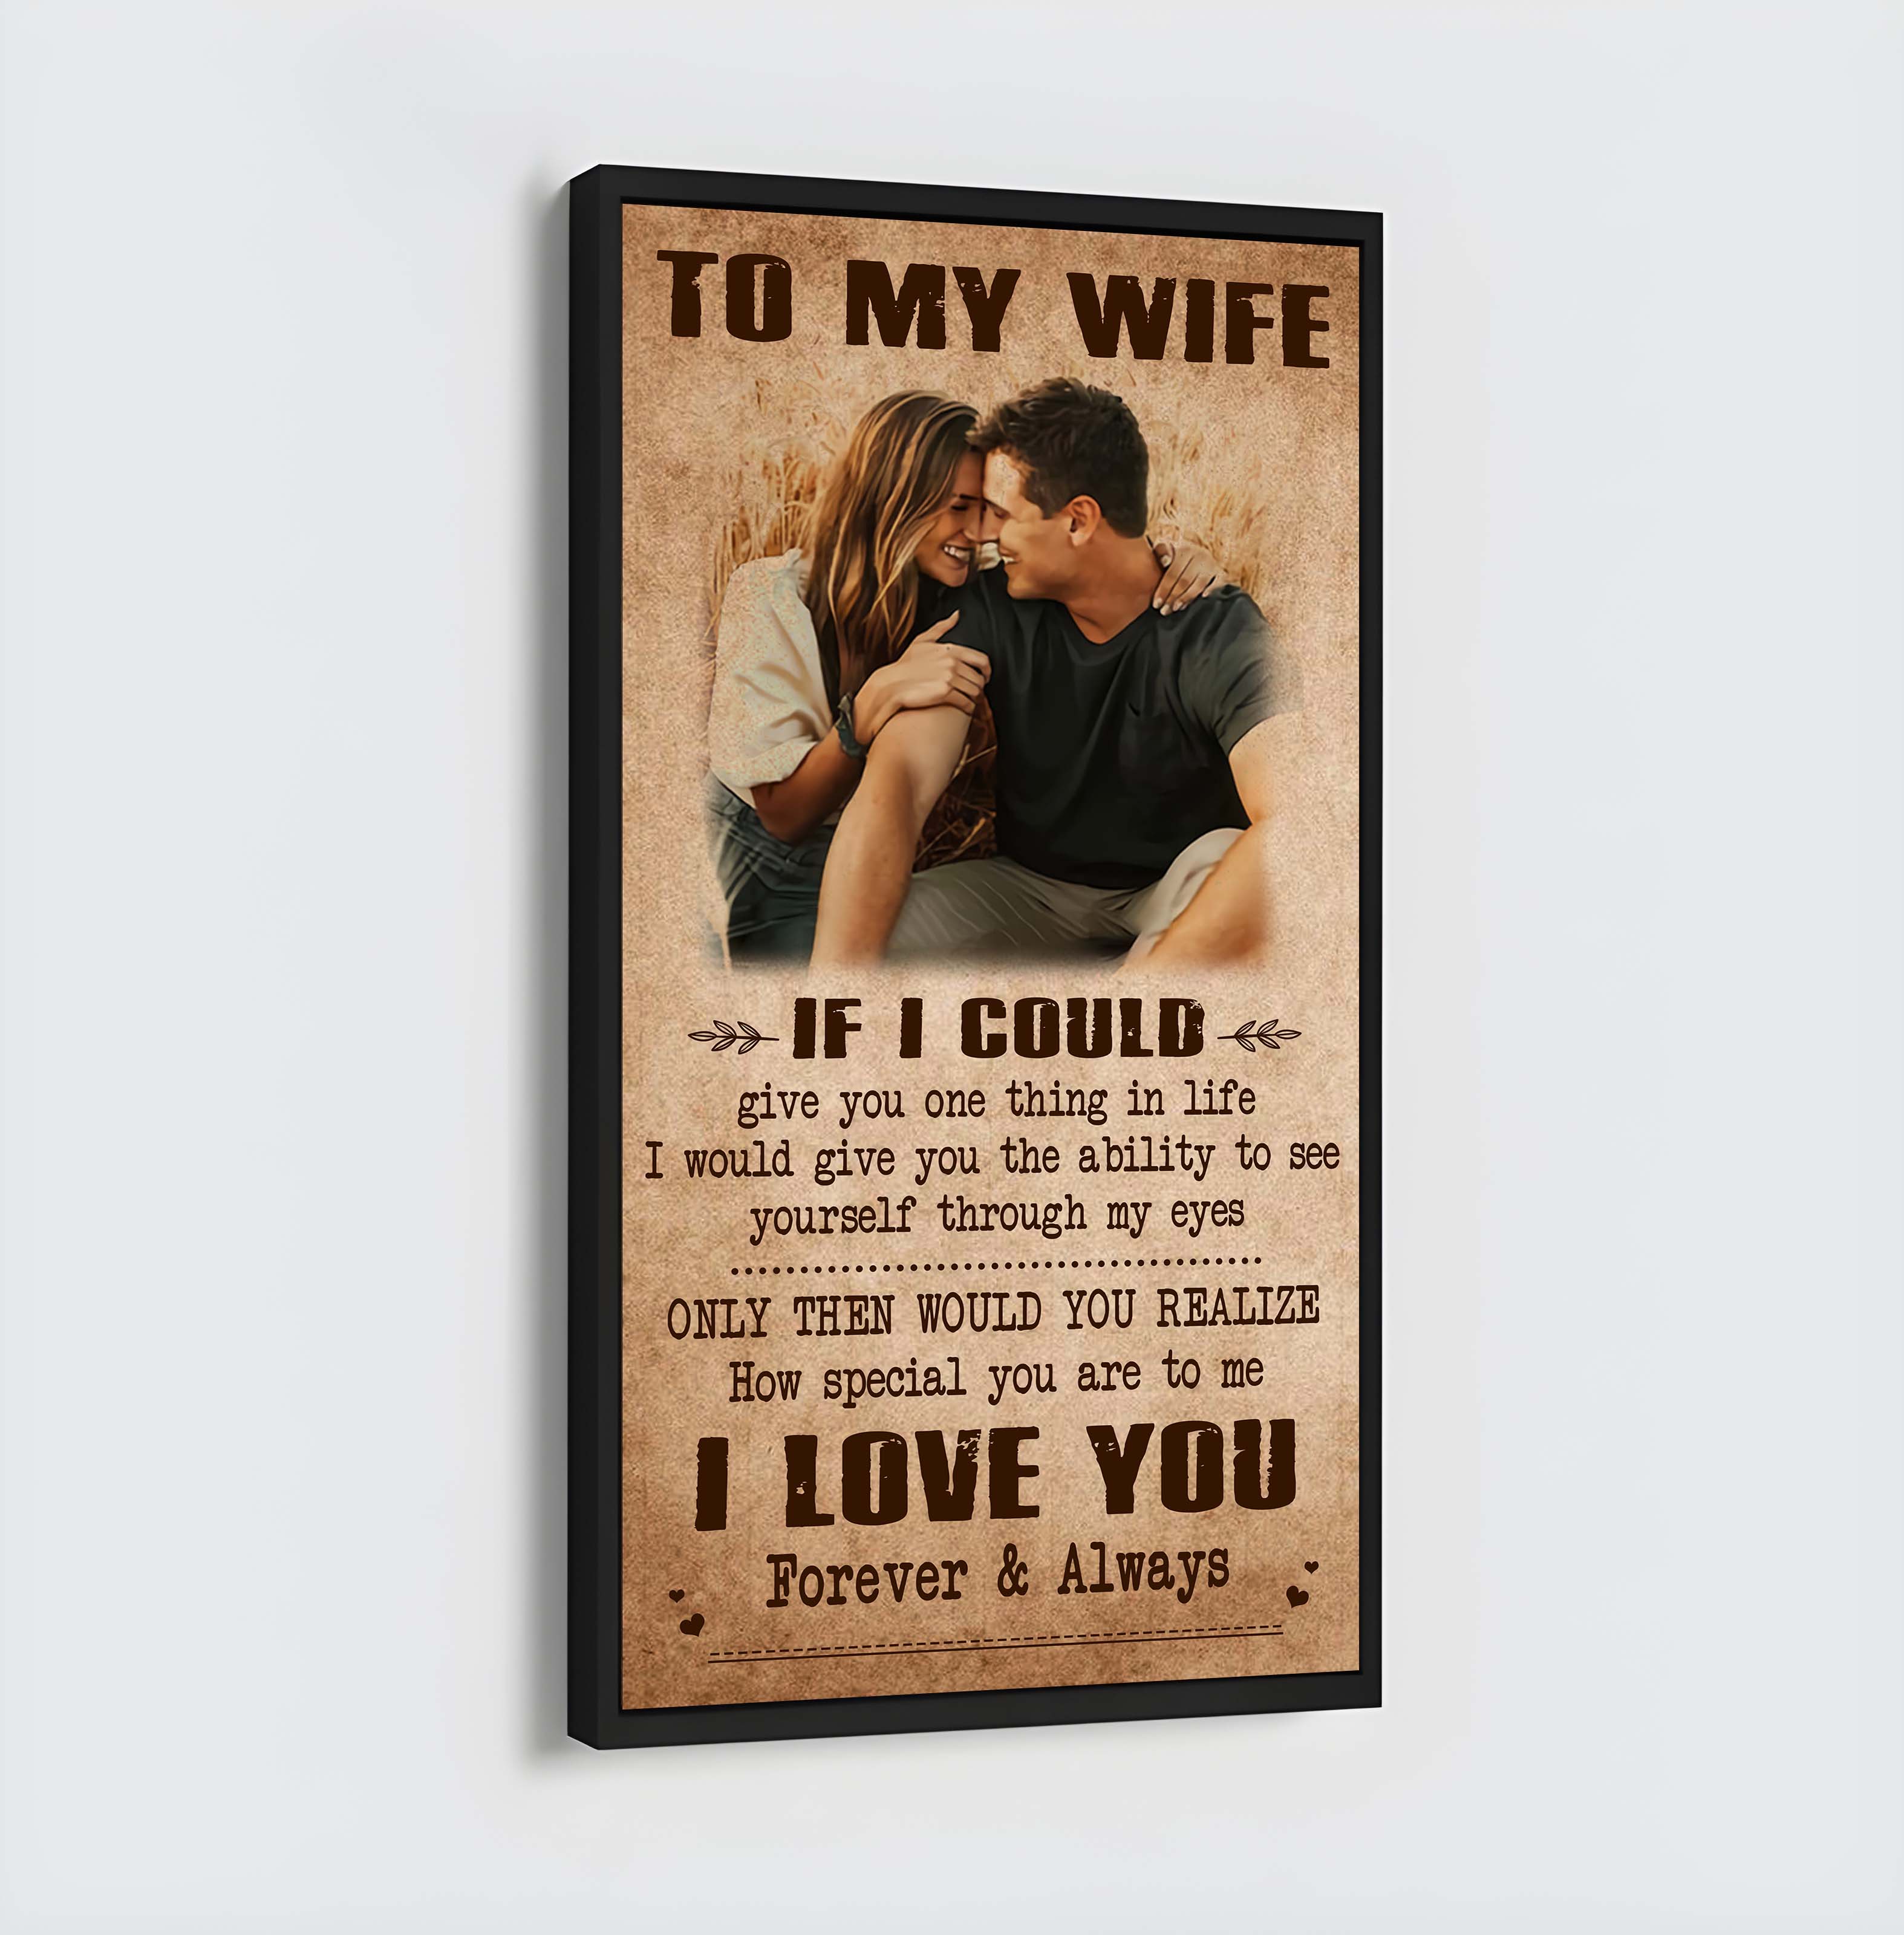 Valentine gifts-Custom image canvas-Husband to Wife- When we get to the end of our lives together